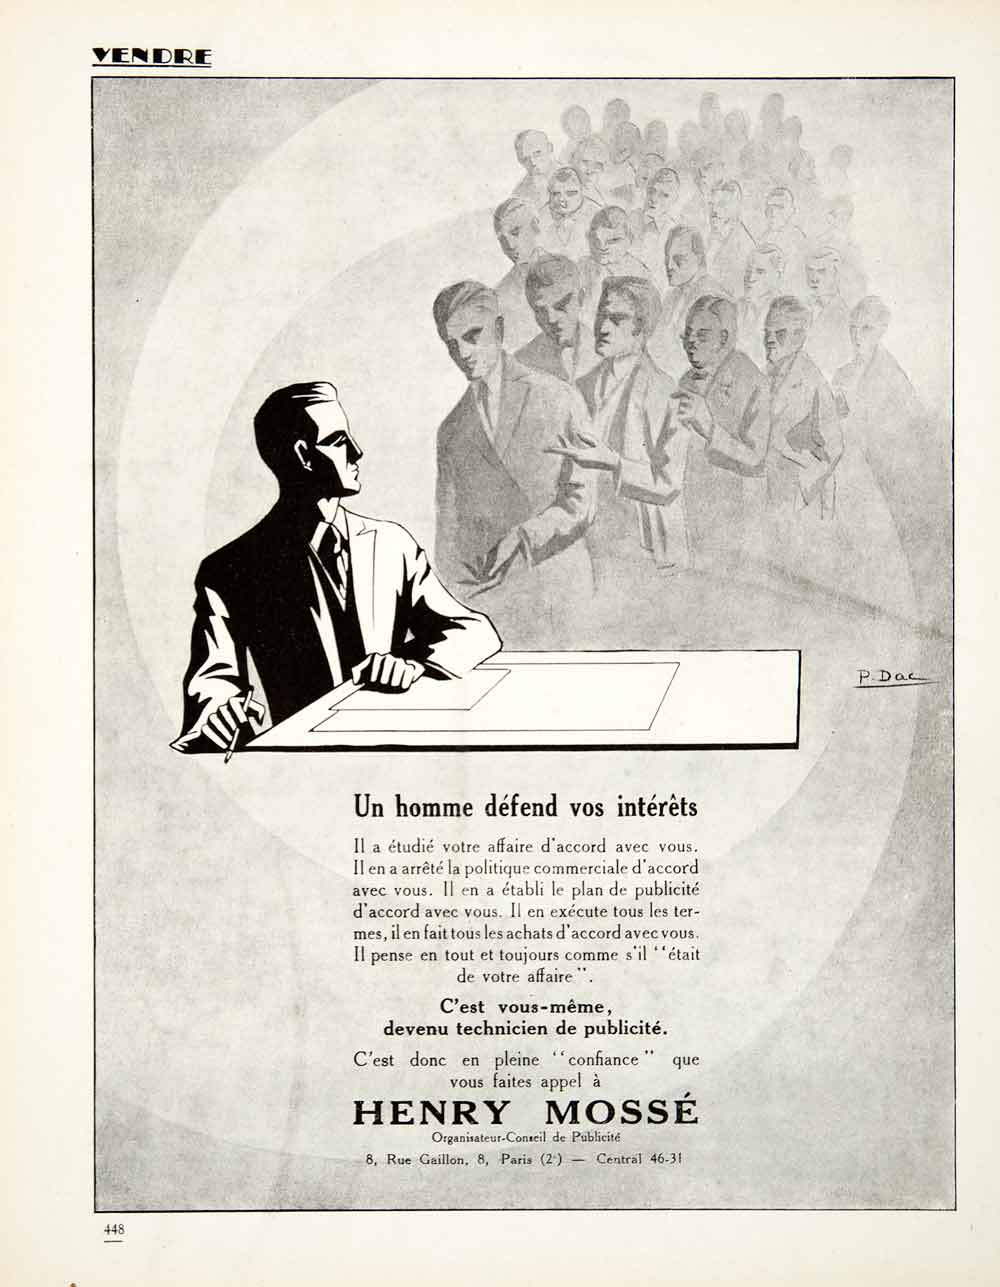 1925 Ad Henry Mosse 8 Rue Gaillon Advertising Specialist Firm Paris French VEN4